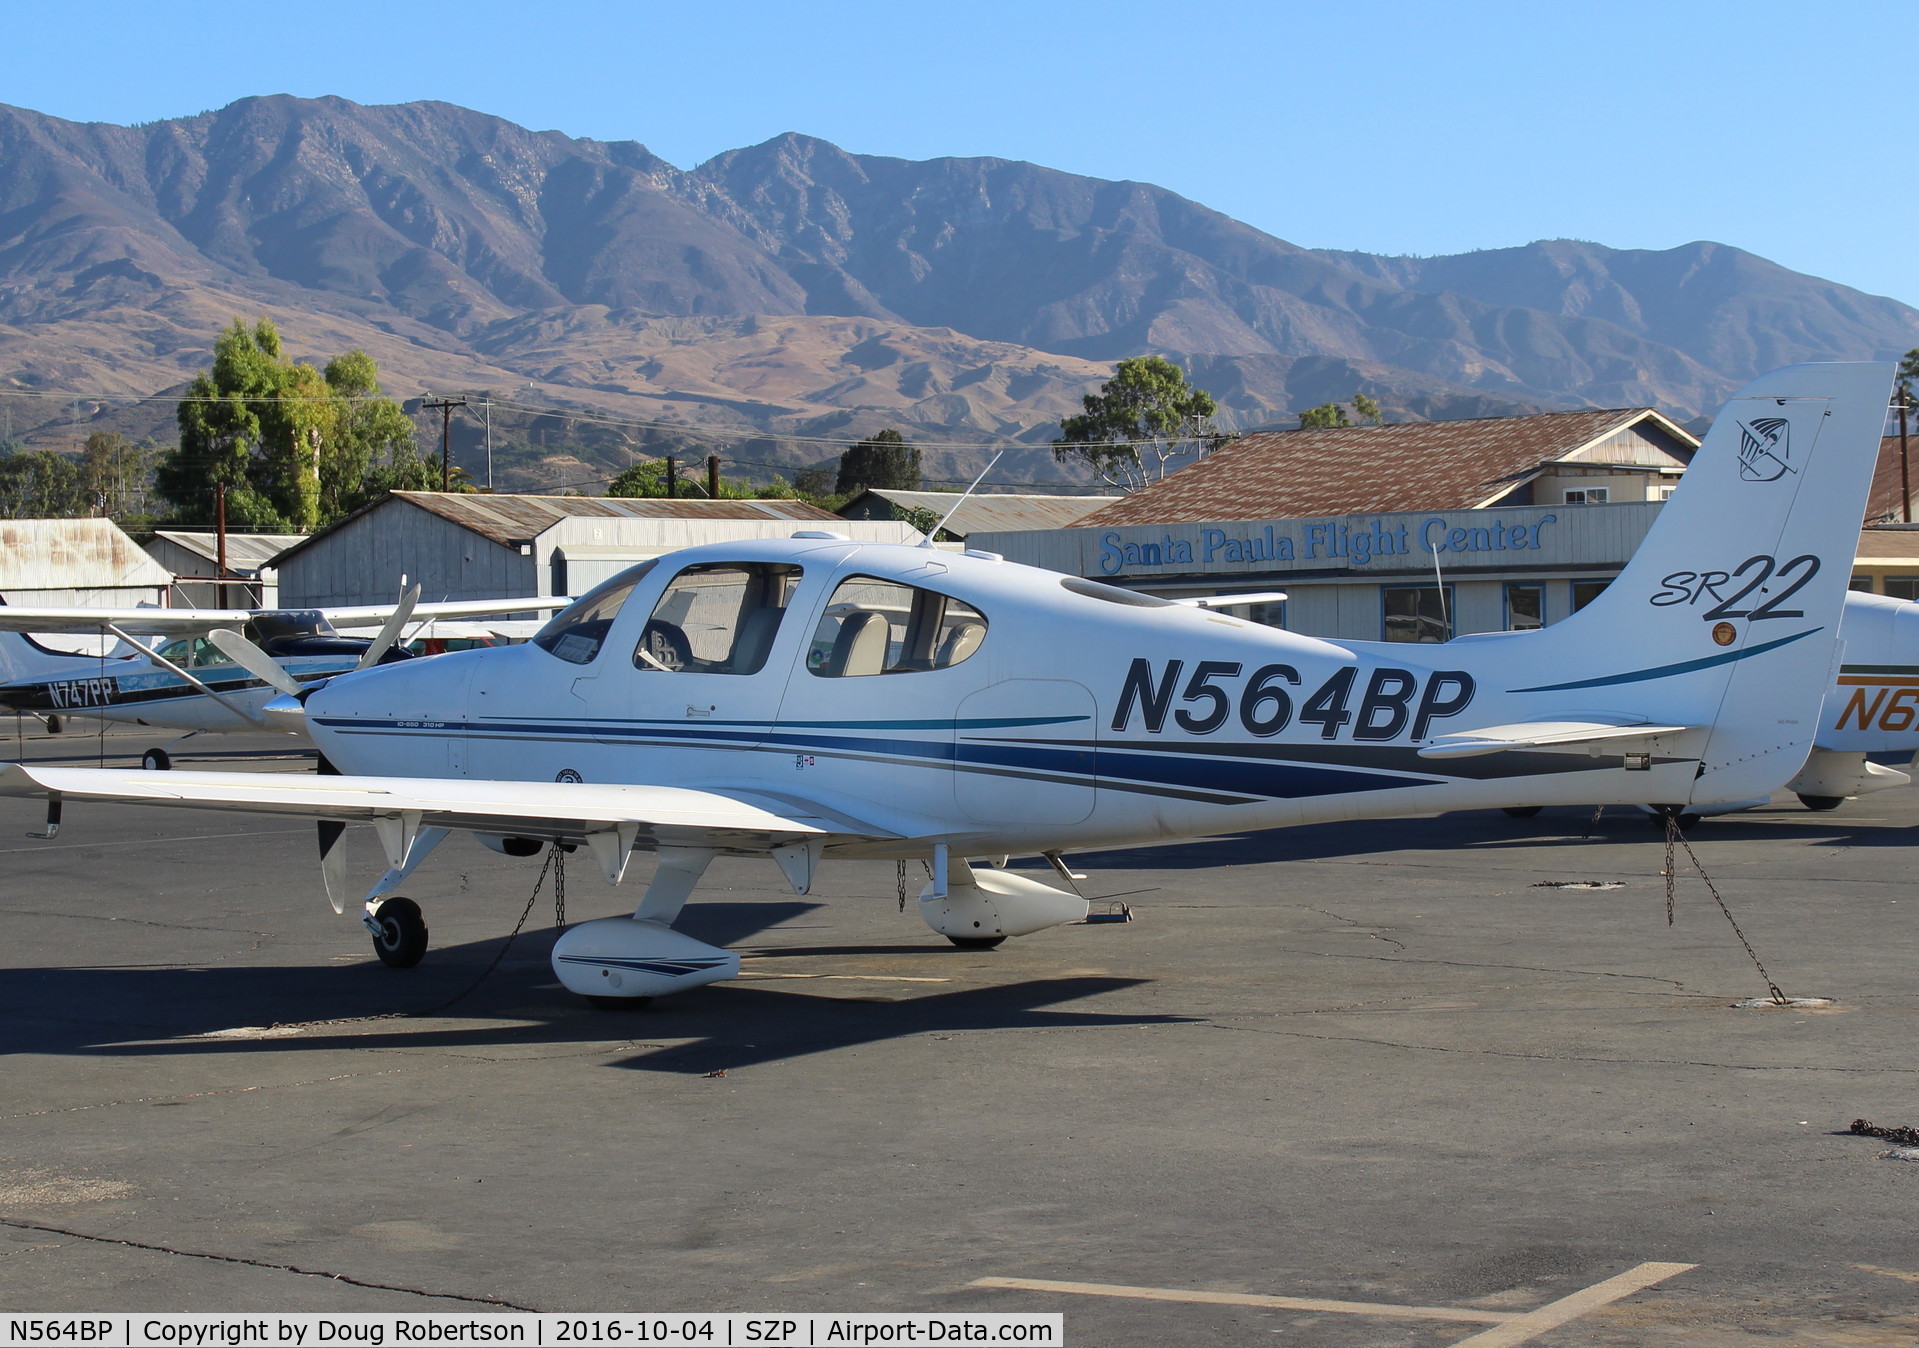 N564BP, 2001 Cirrus SR22 C/N 0135, 2001 Cirrus SR22, Continental IO-550-N 300 Hp, all SR20/22s have BRS ballistic recovery parachute system (That company partially owned by Cirrus), as standard equipment